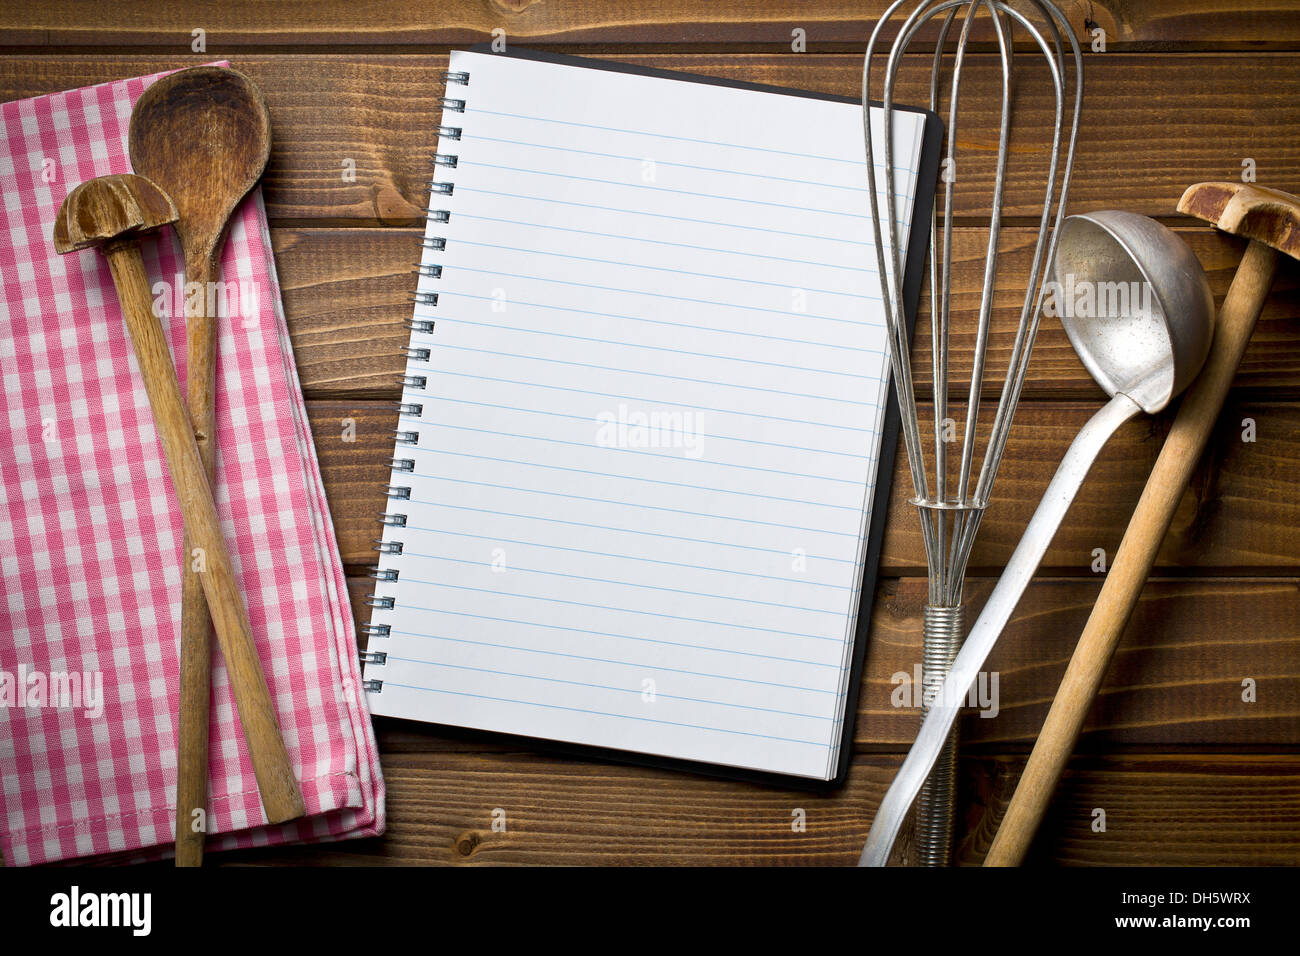 top view of recipe book with kitchenware on wooden table Stock Photo